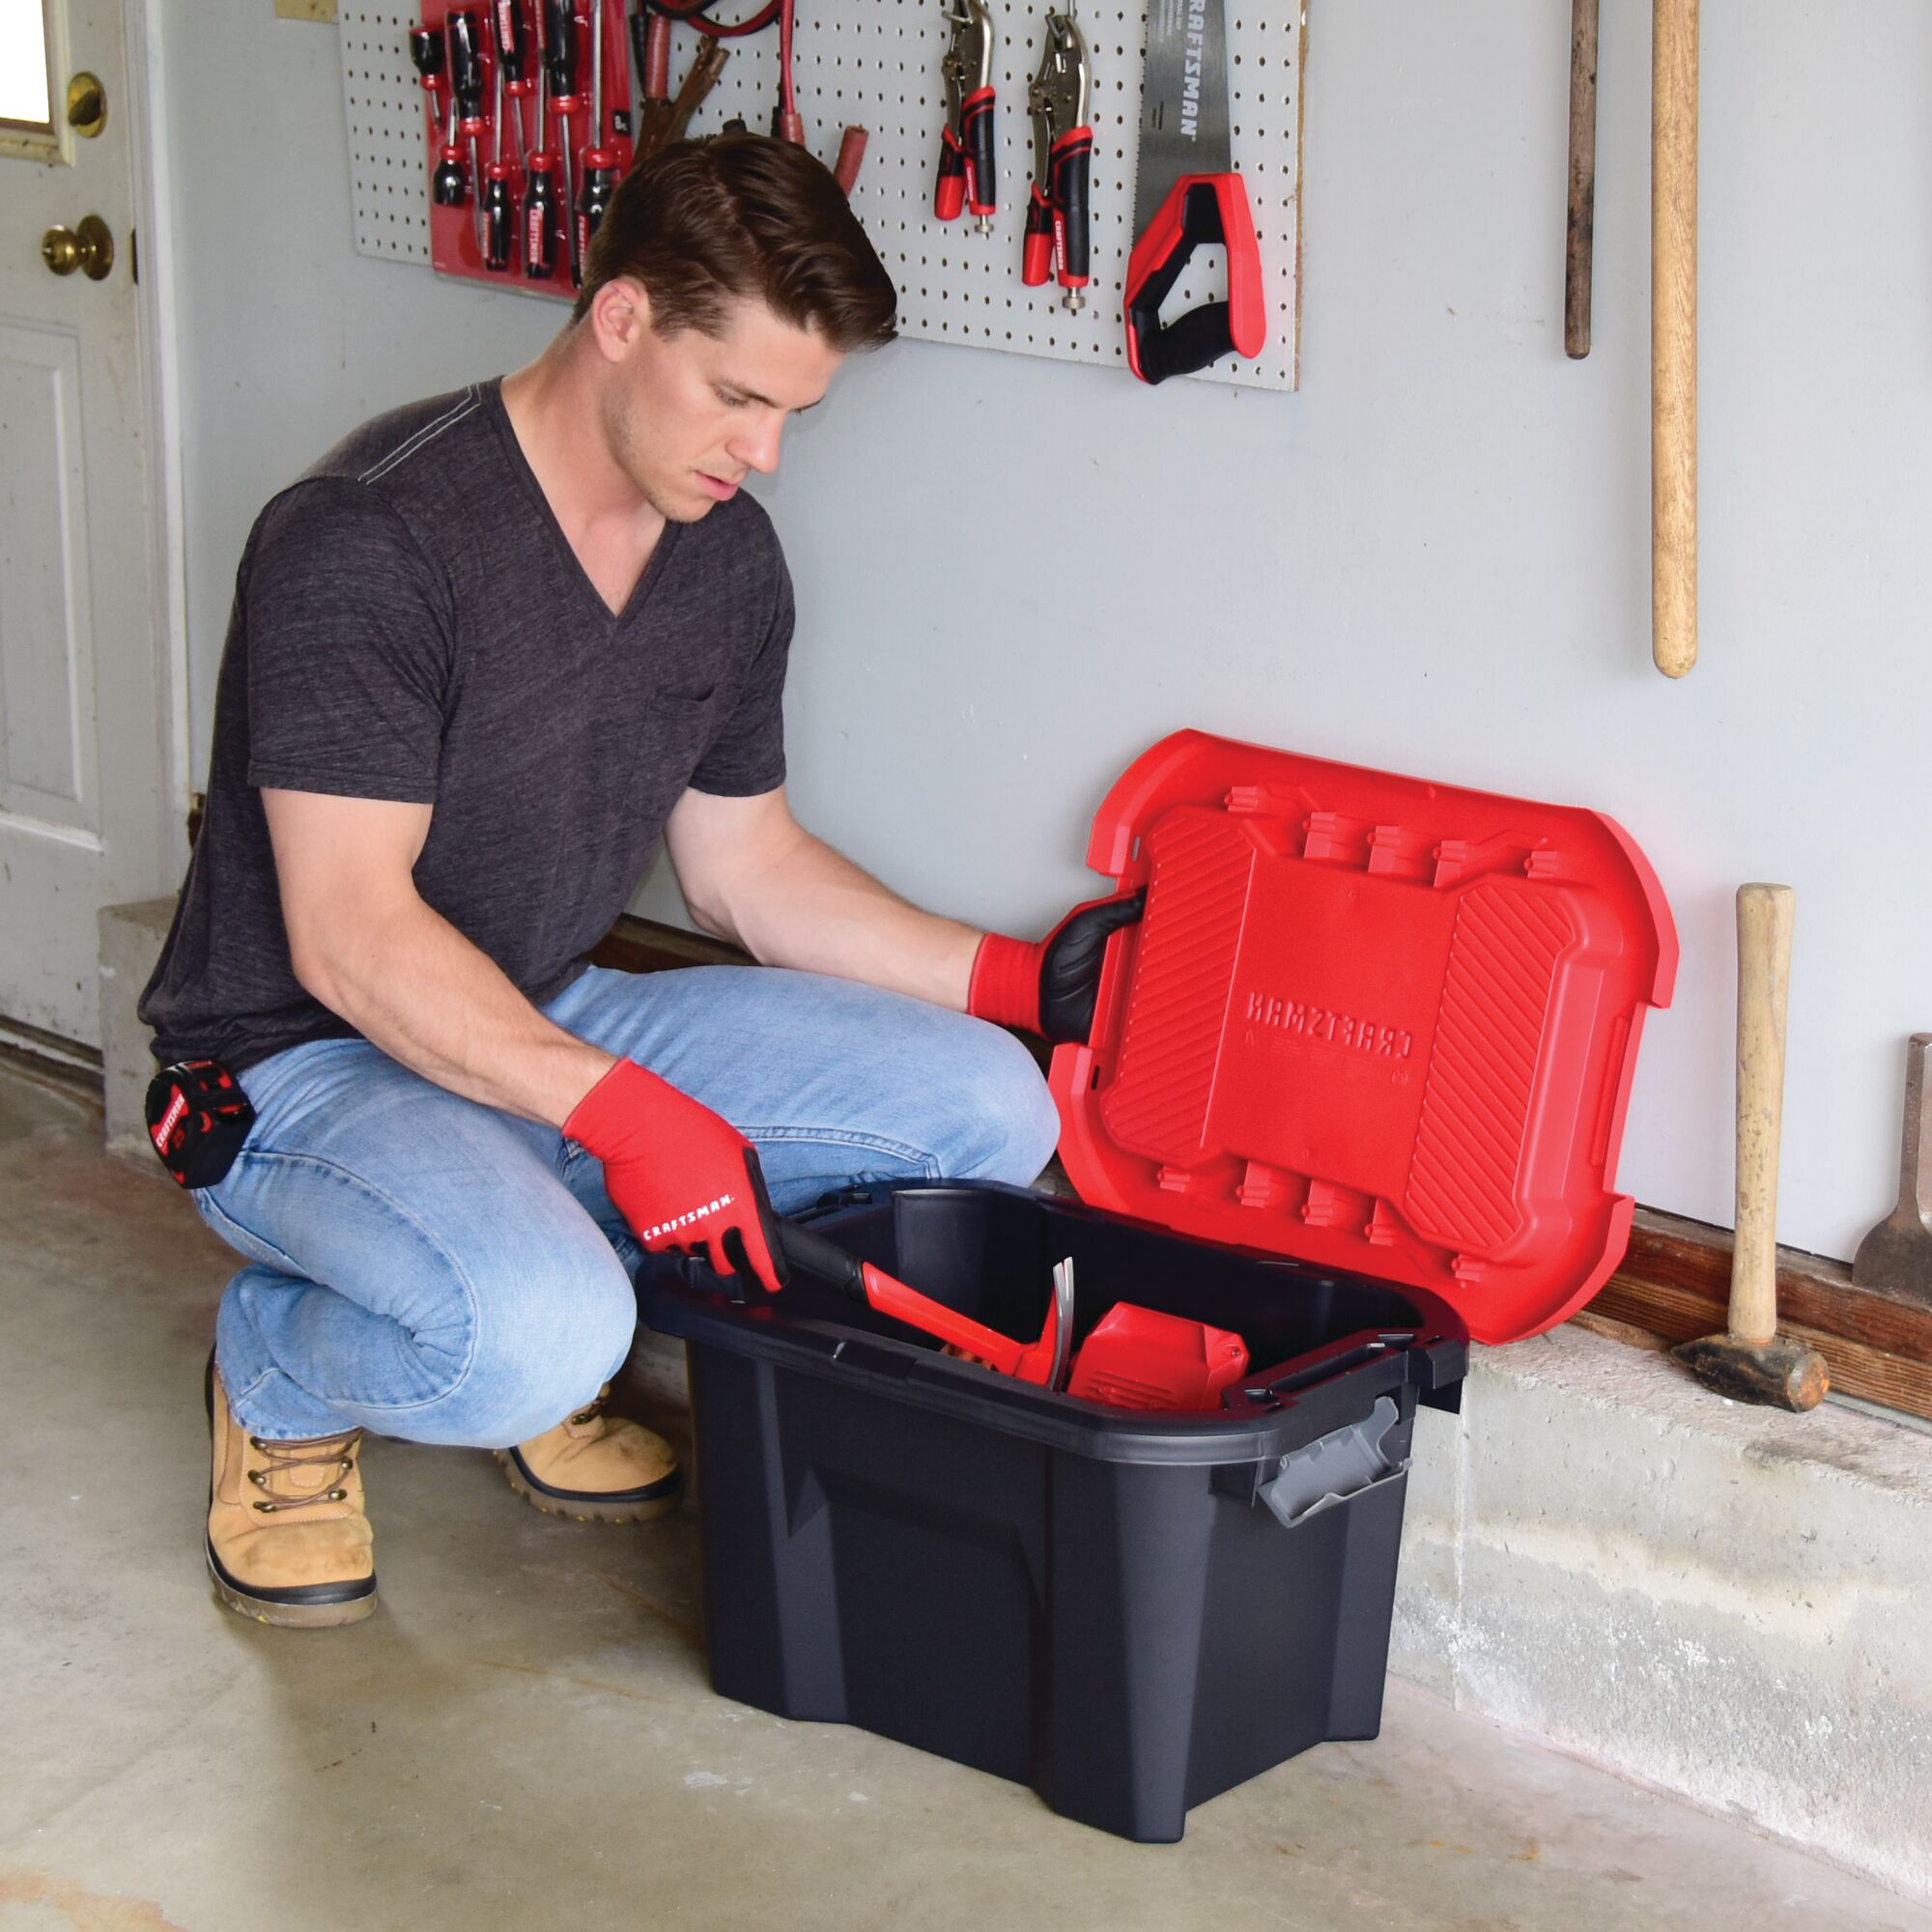 10 Gallon latching tote being used by a person to store tools.